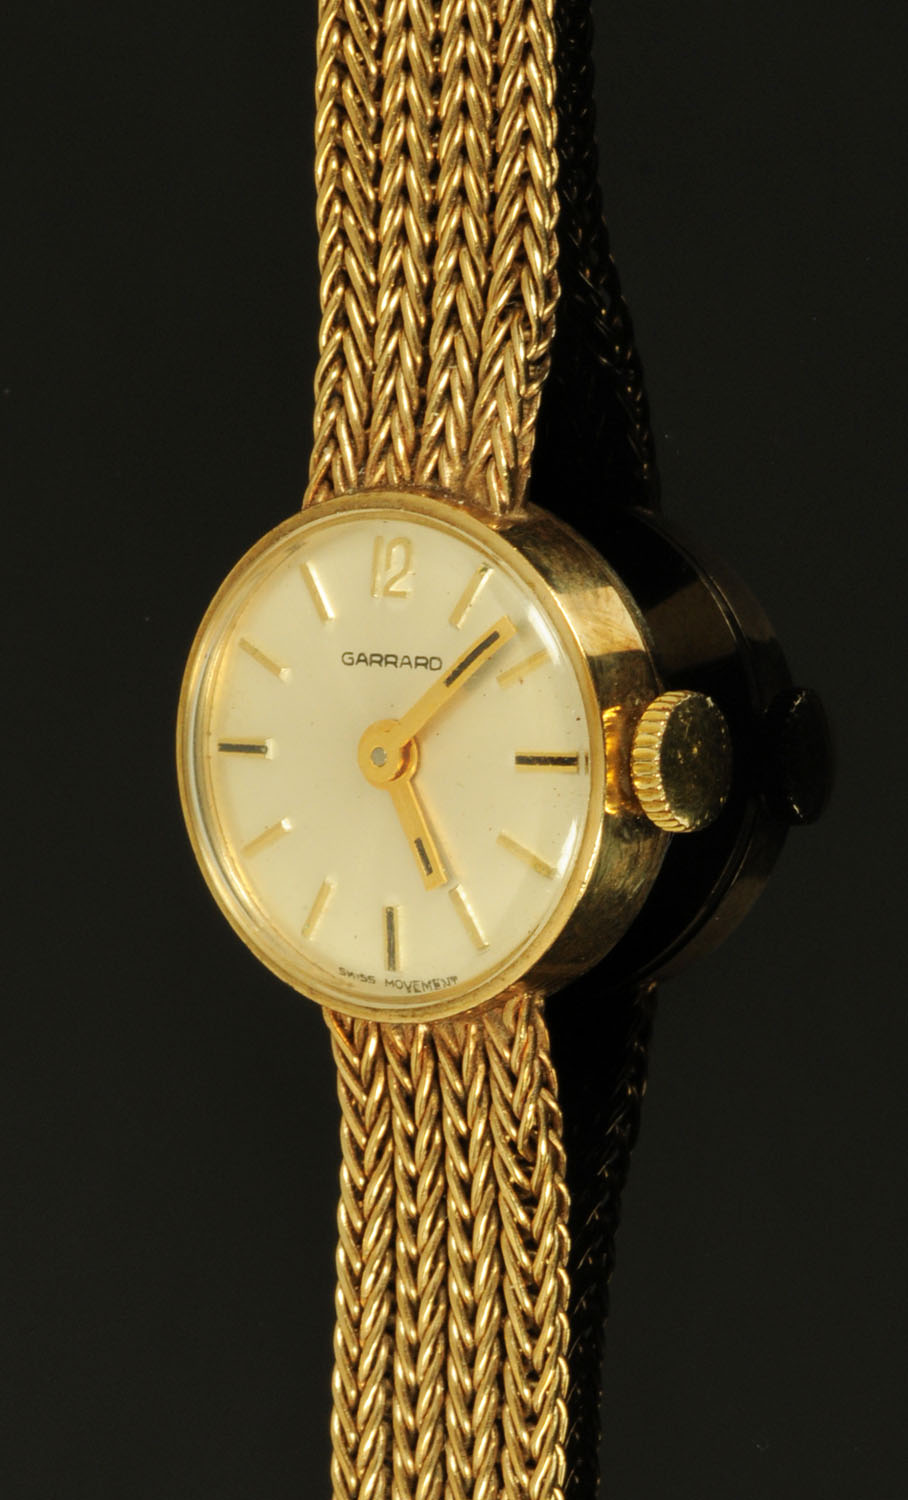 A 9 ct gold wristwatch, by Garrard and complete with 9 ct gold mesh link strap. 16.4 grams gross.